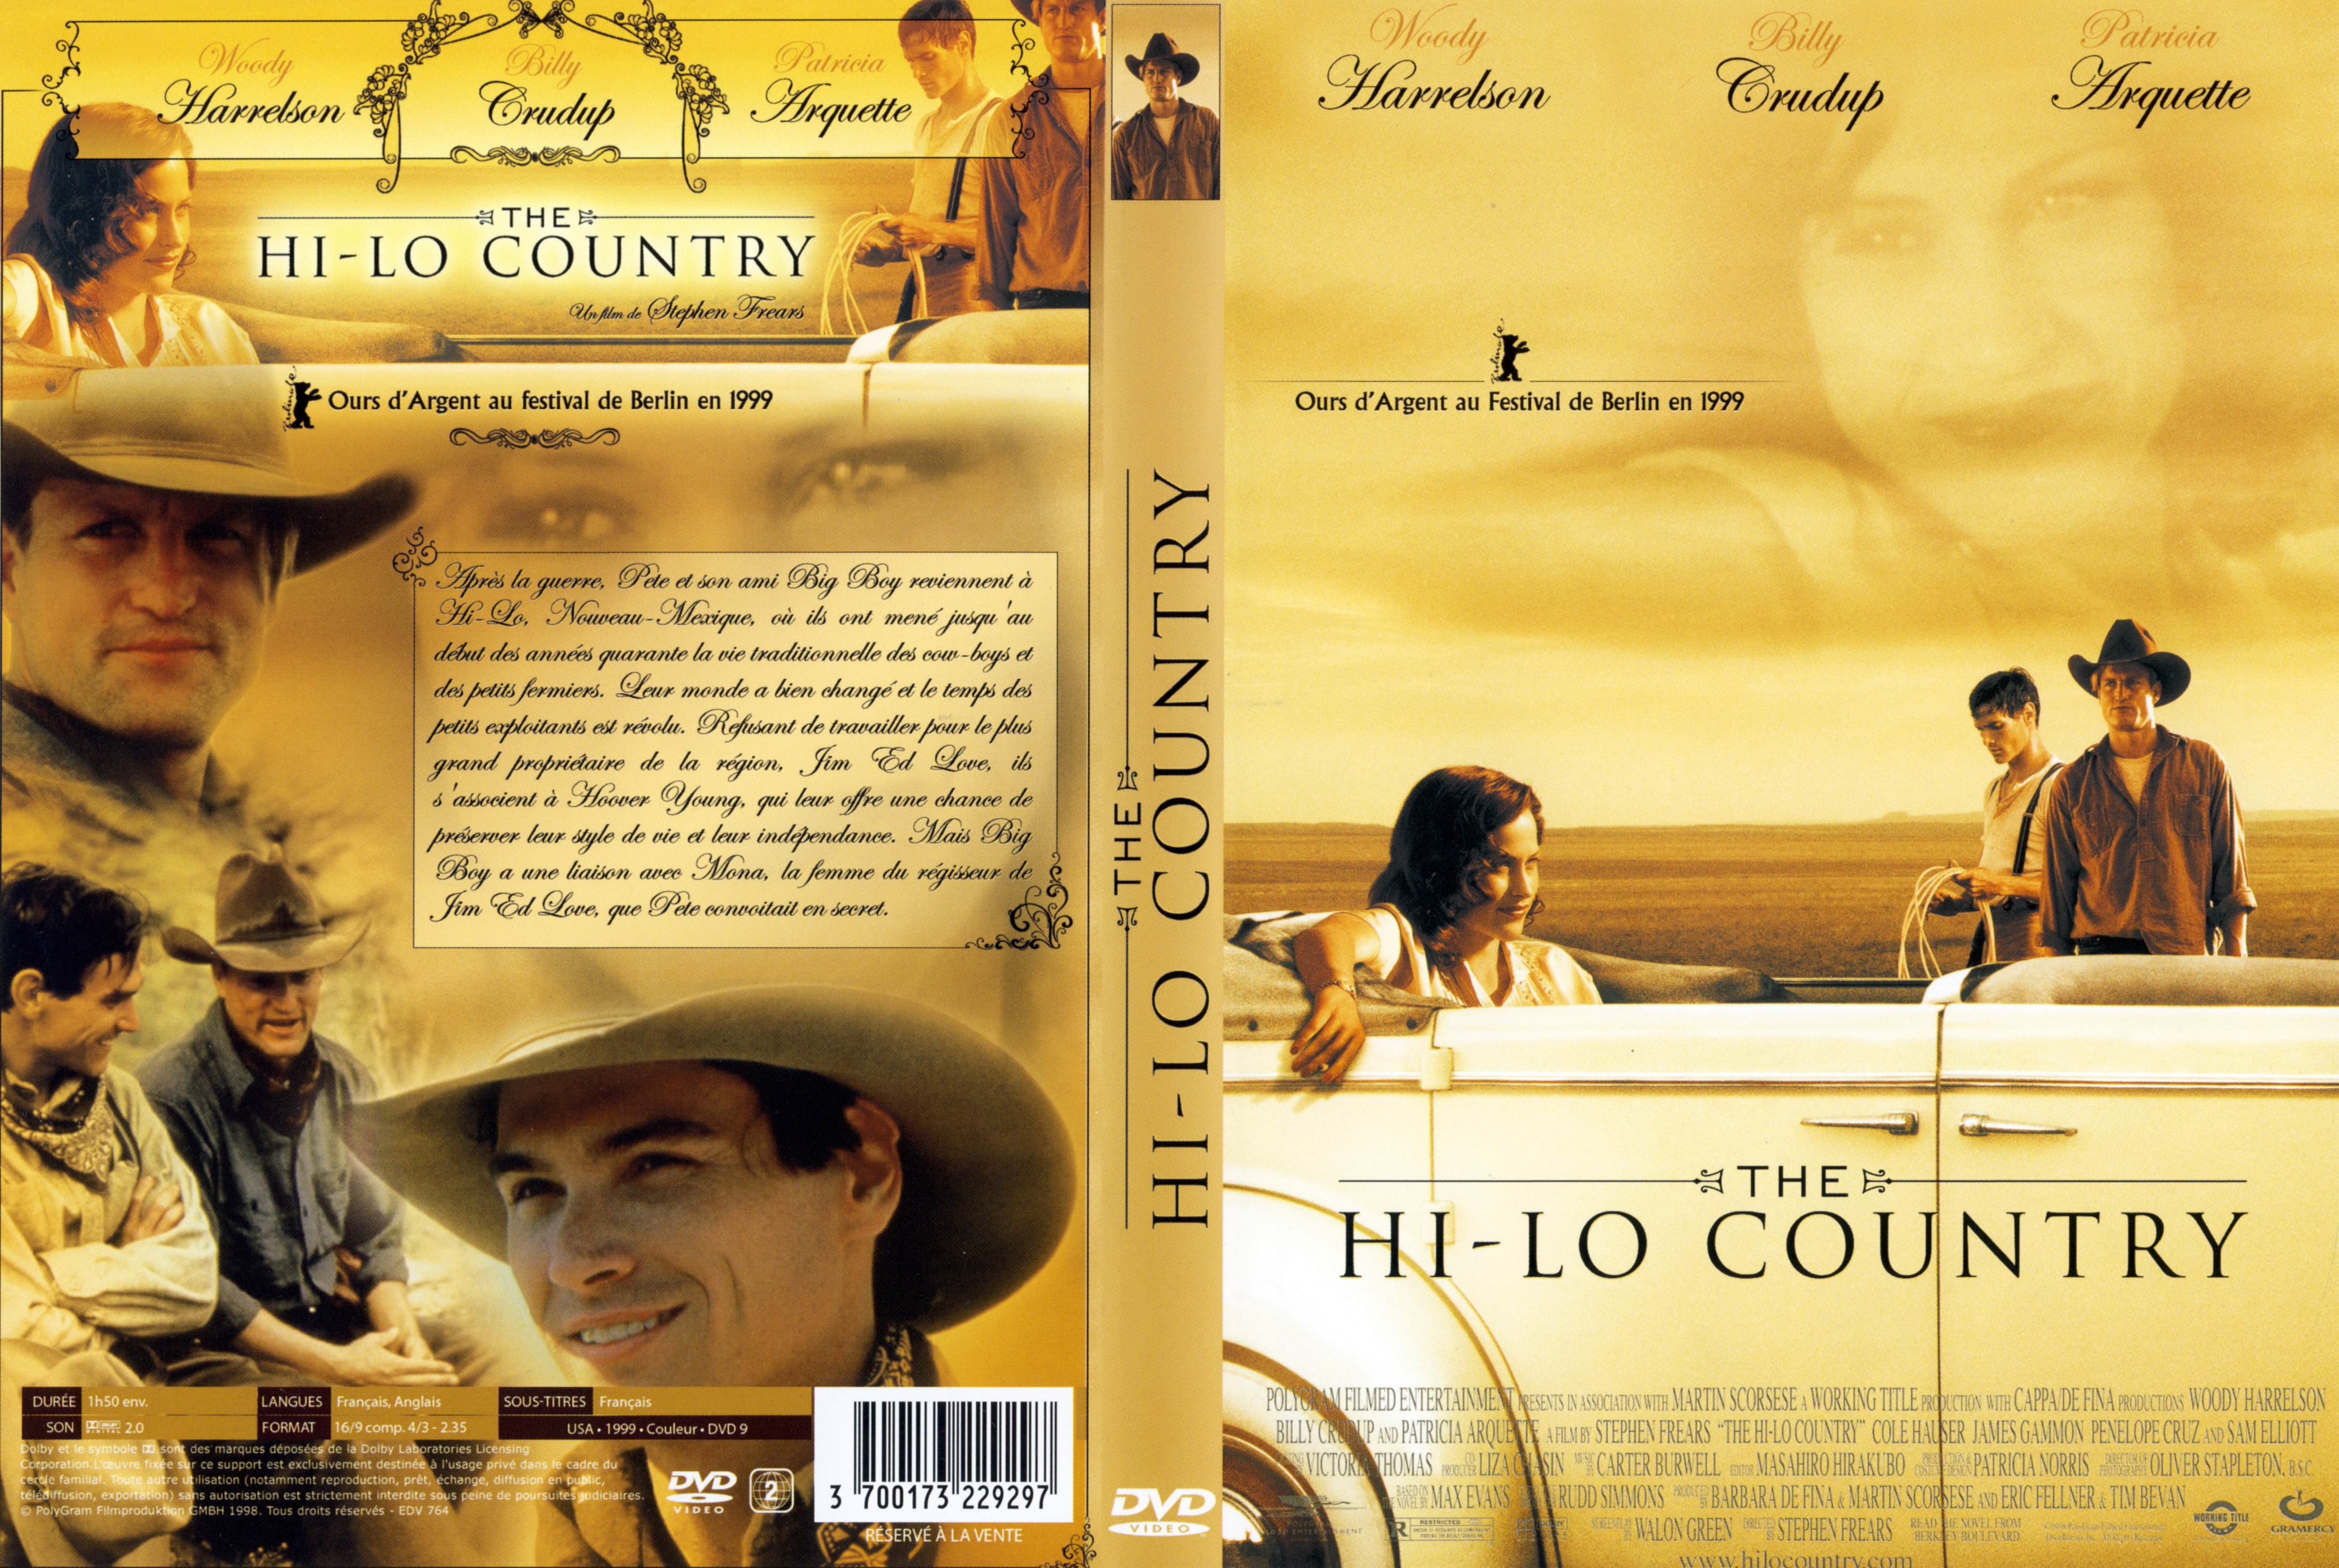 Jaquette DVD The hi-lo country